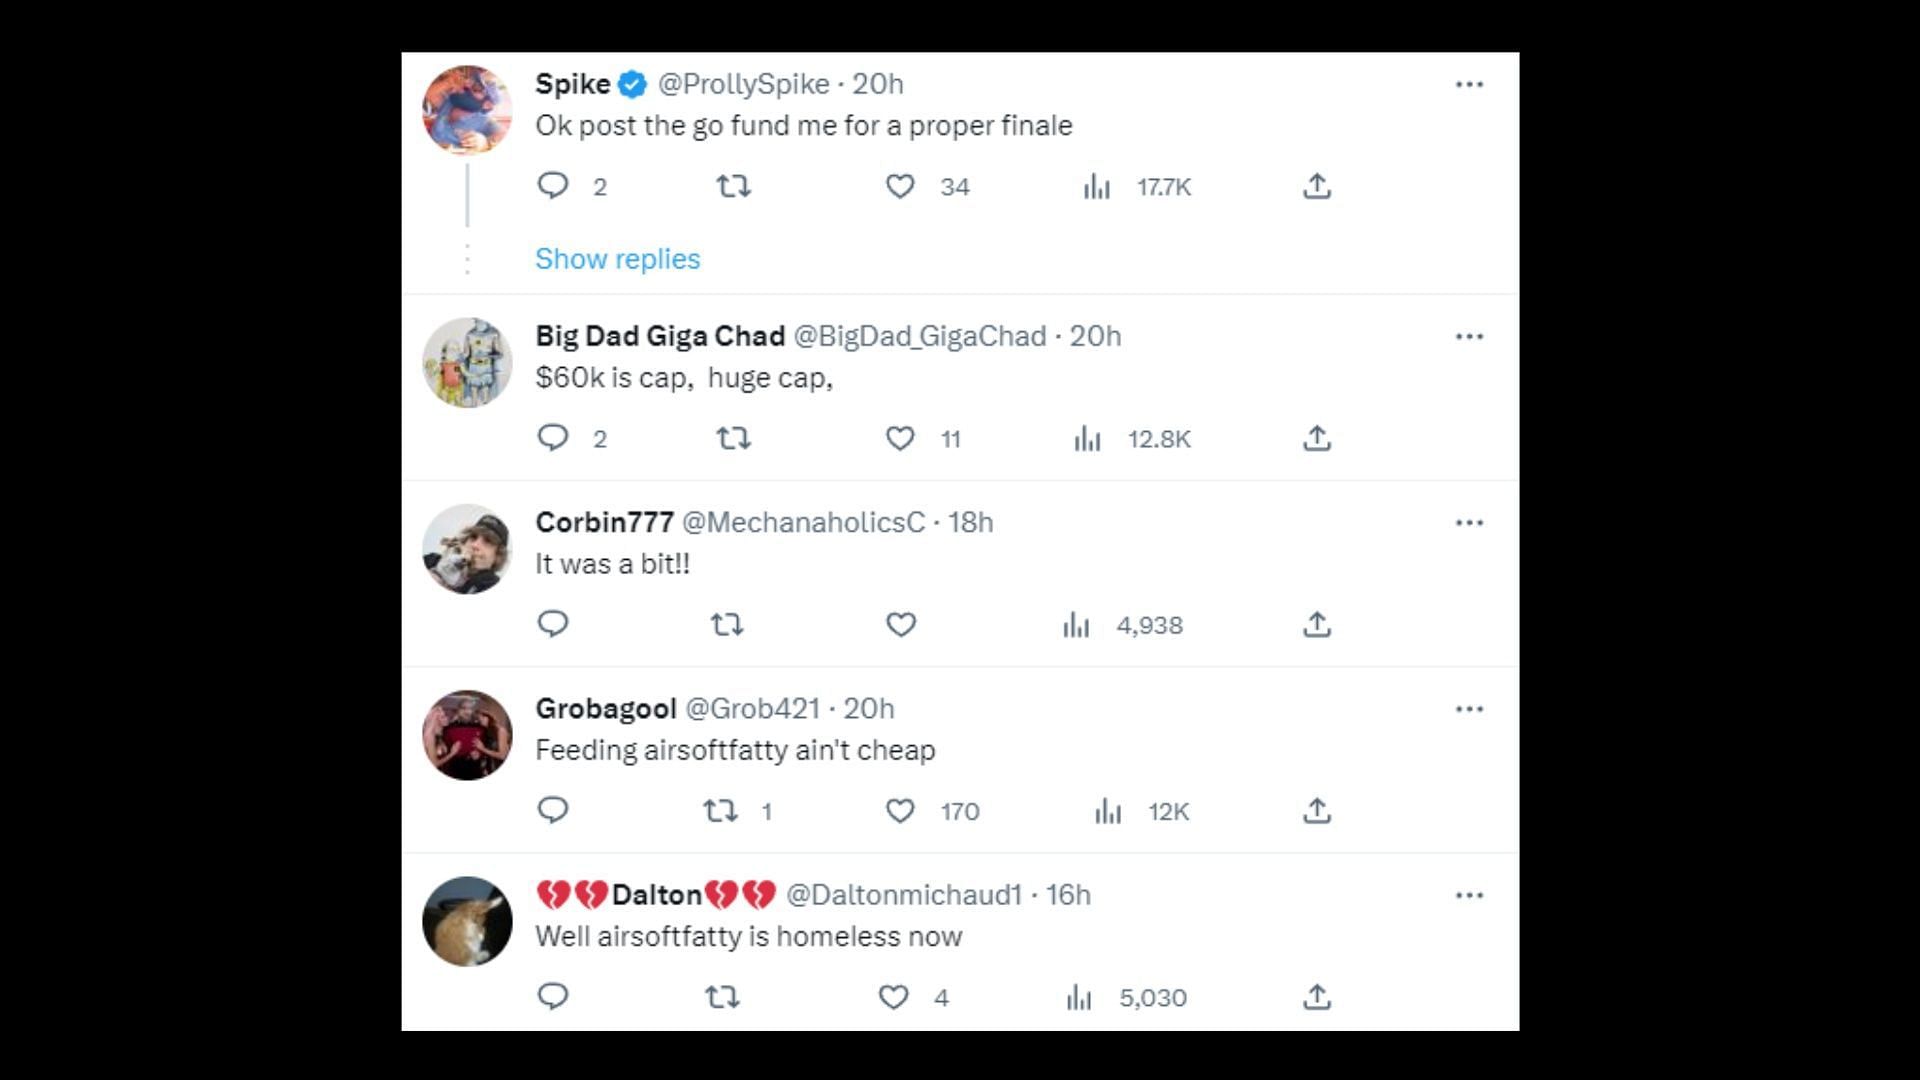 Netizens react to the end of the show (Image via DramaAlert/Twitter)